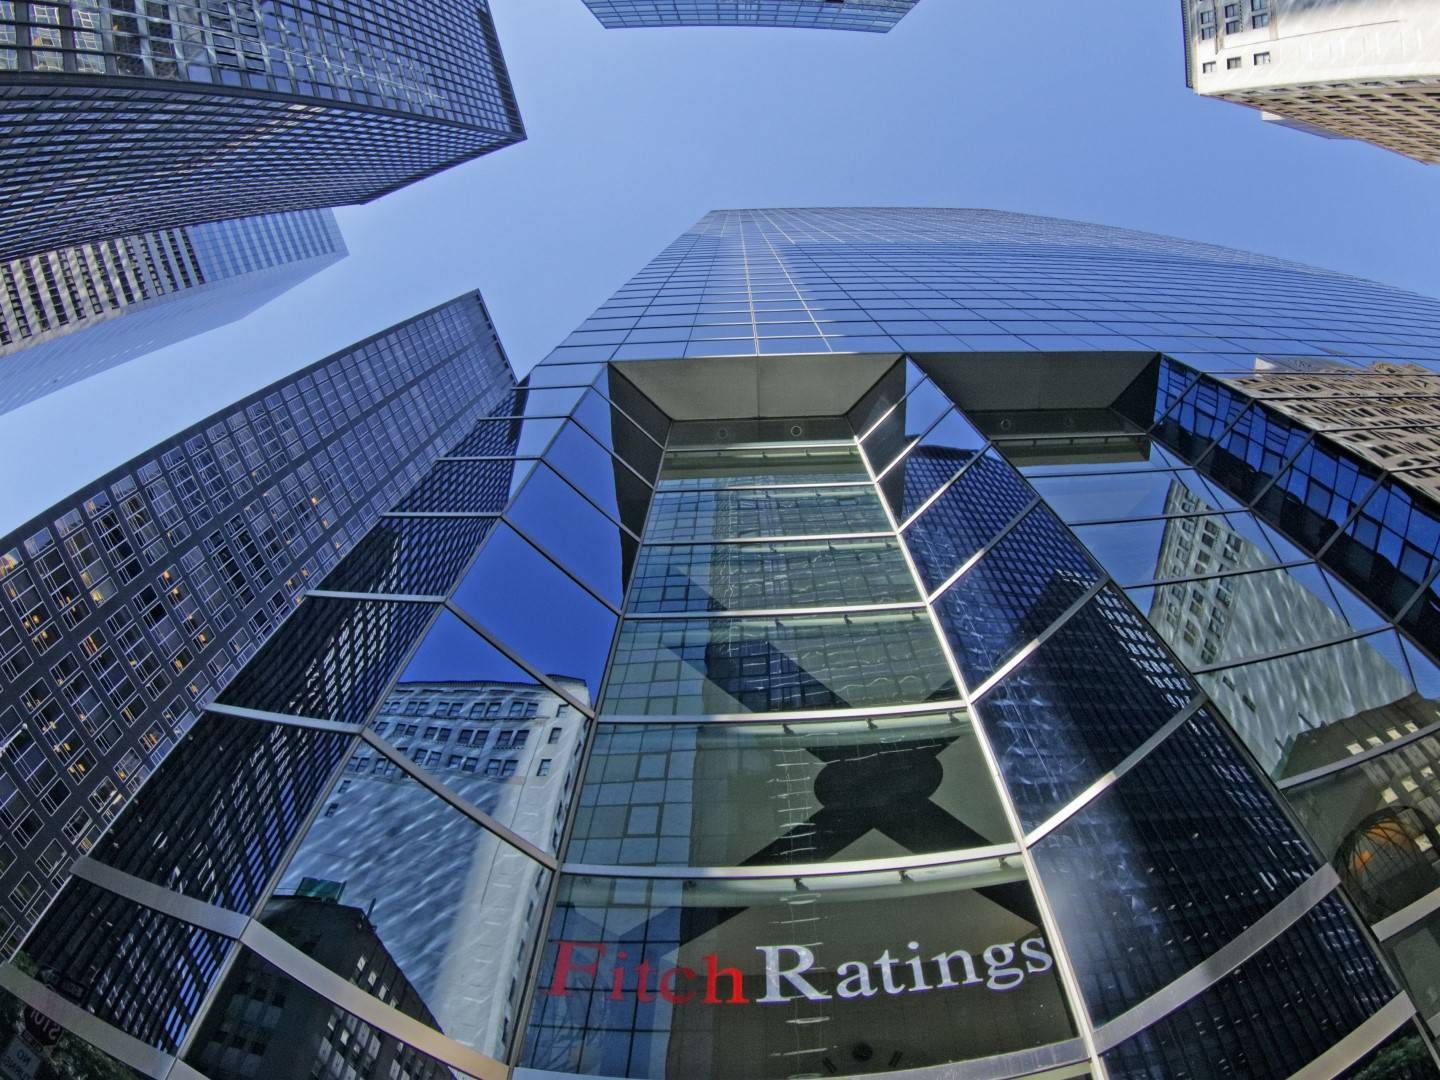 Die Zentrale der Ratingagentur Fitch in New York. | Foto: picture alliance / Global Travel Images